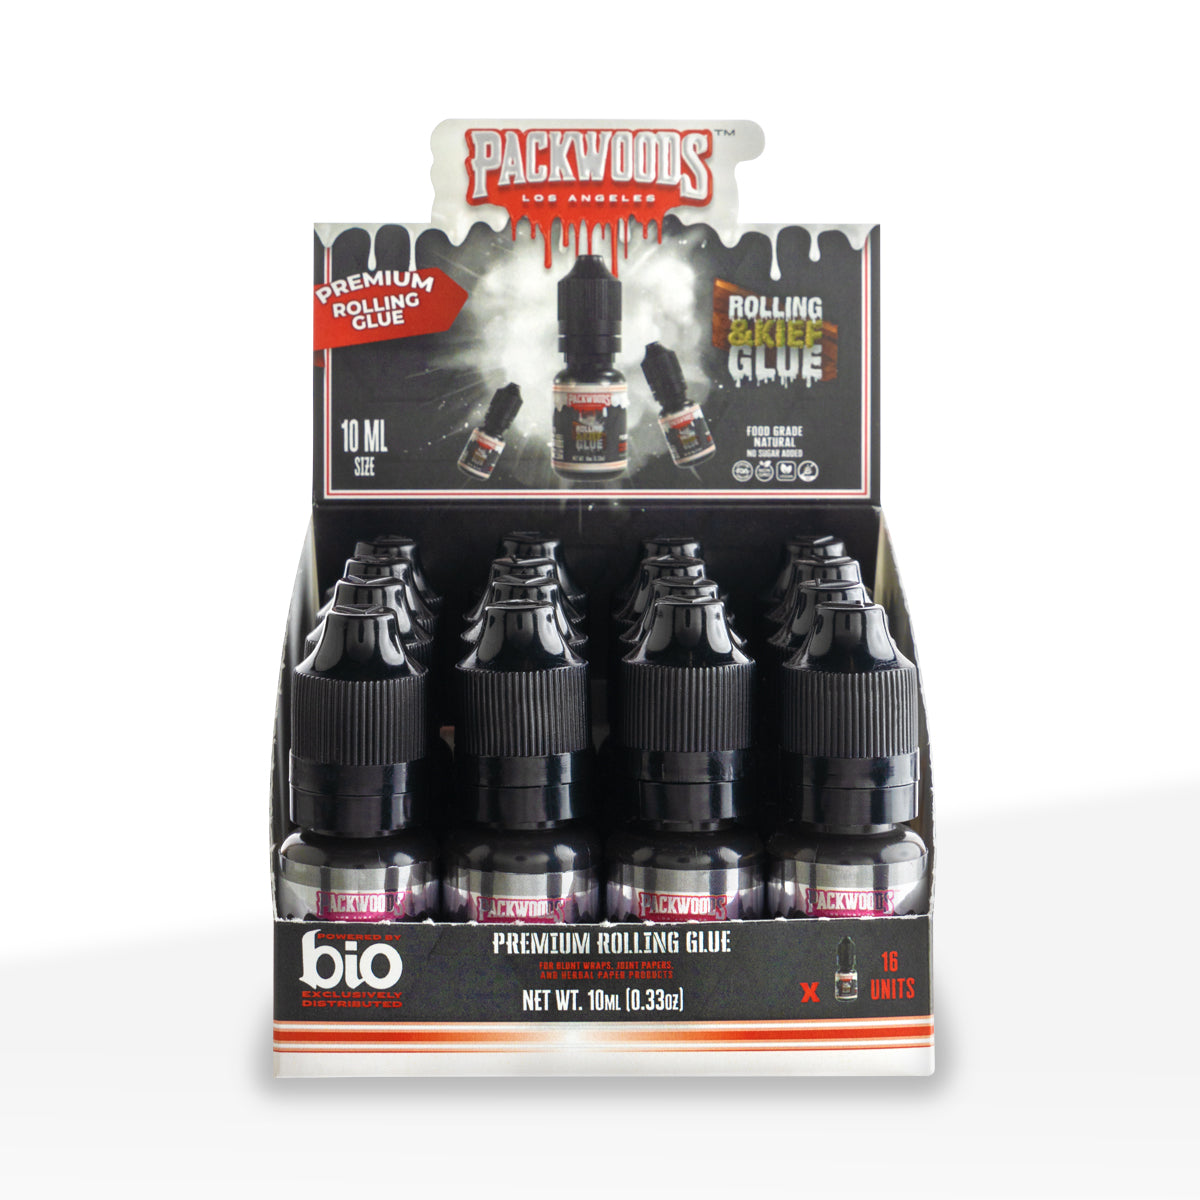 Packwoods x BIO | Blunt Rolling & Kief Glue All in One | 10ml Droppers - 16 Count